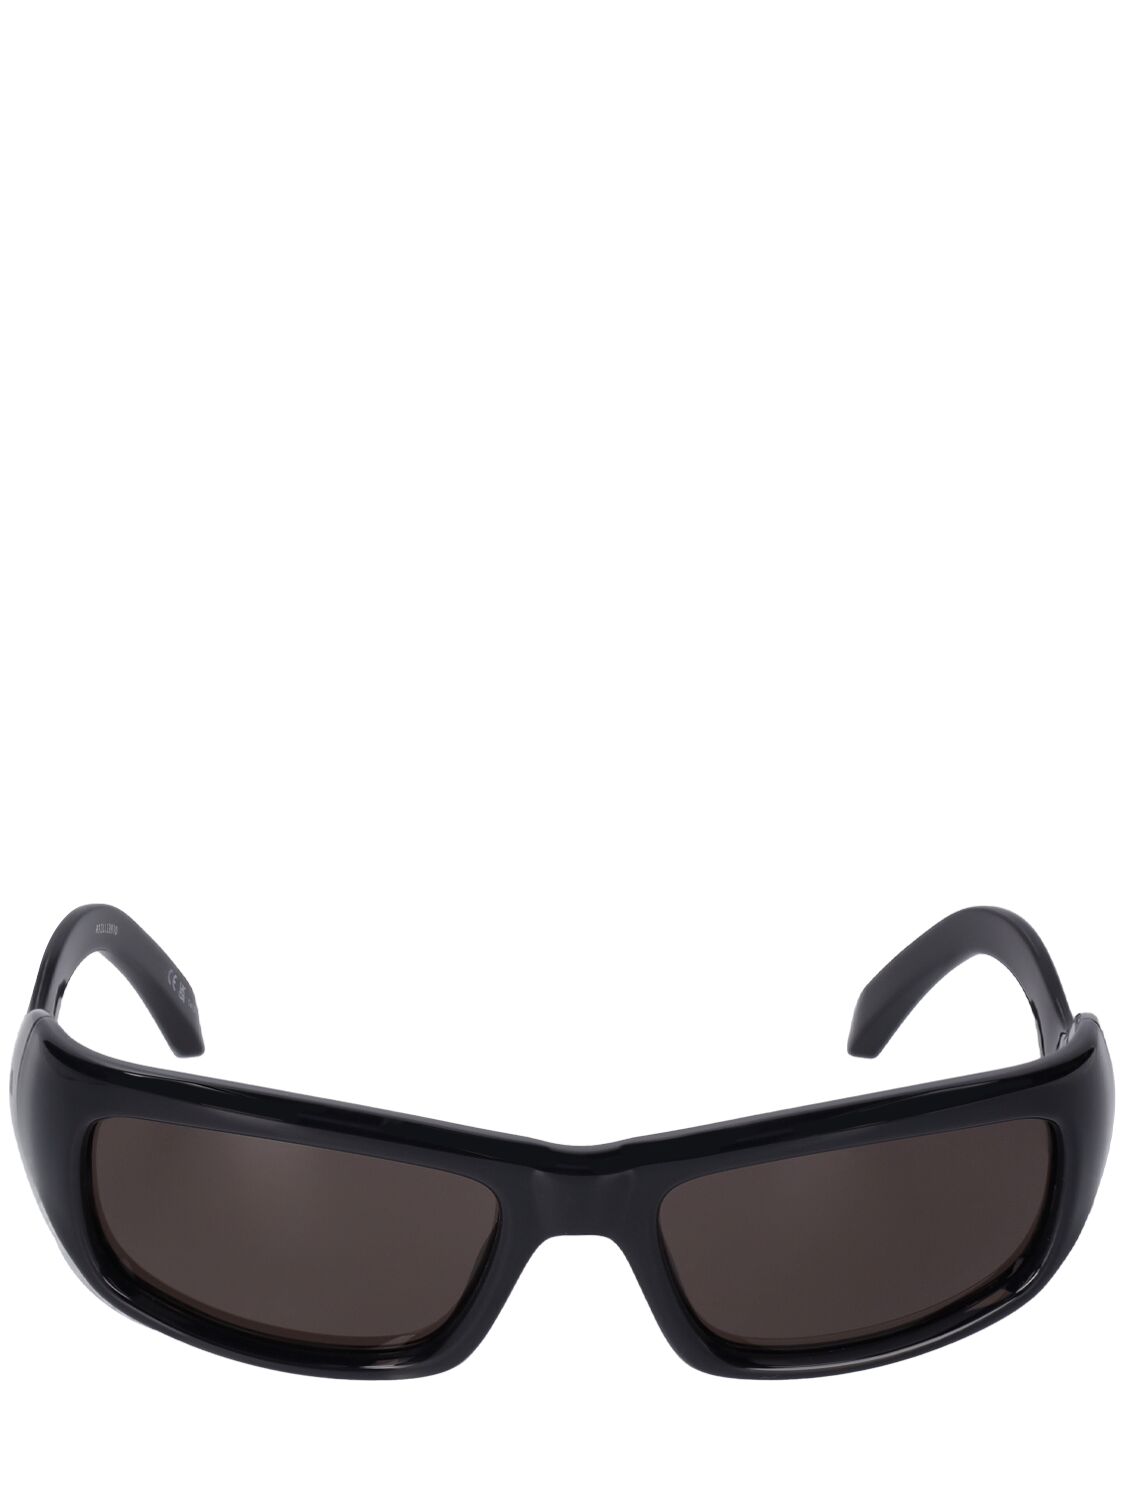 Image of 0320s Hamptons Injected Sunglasses